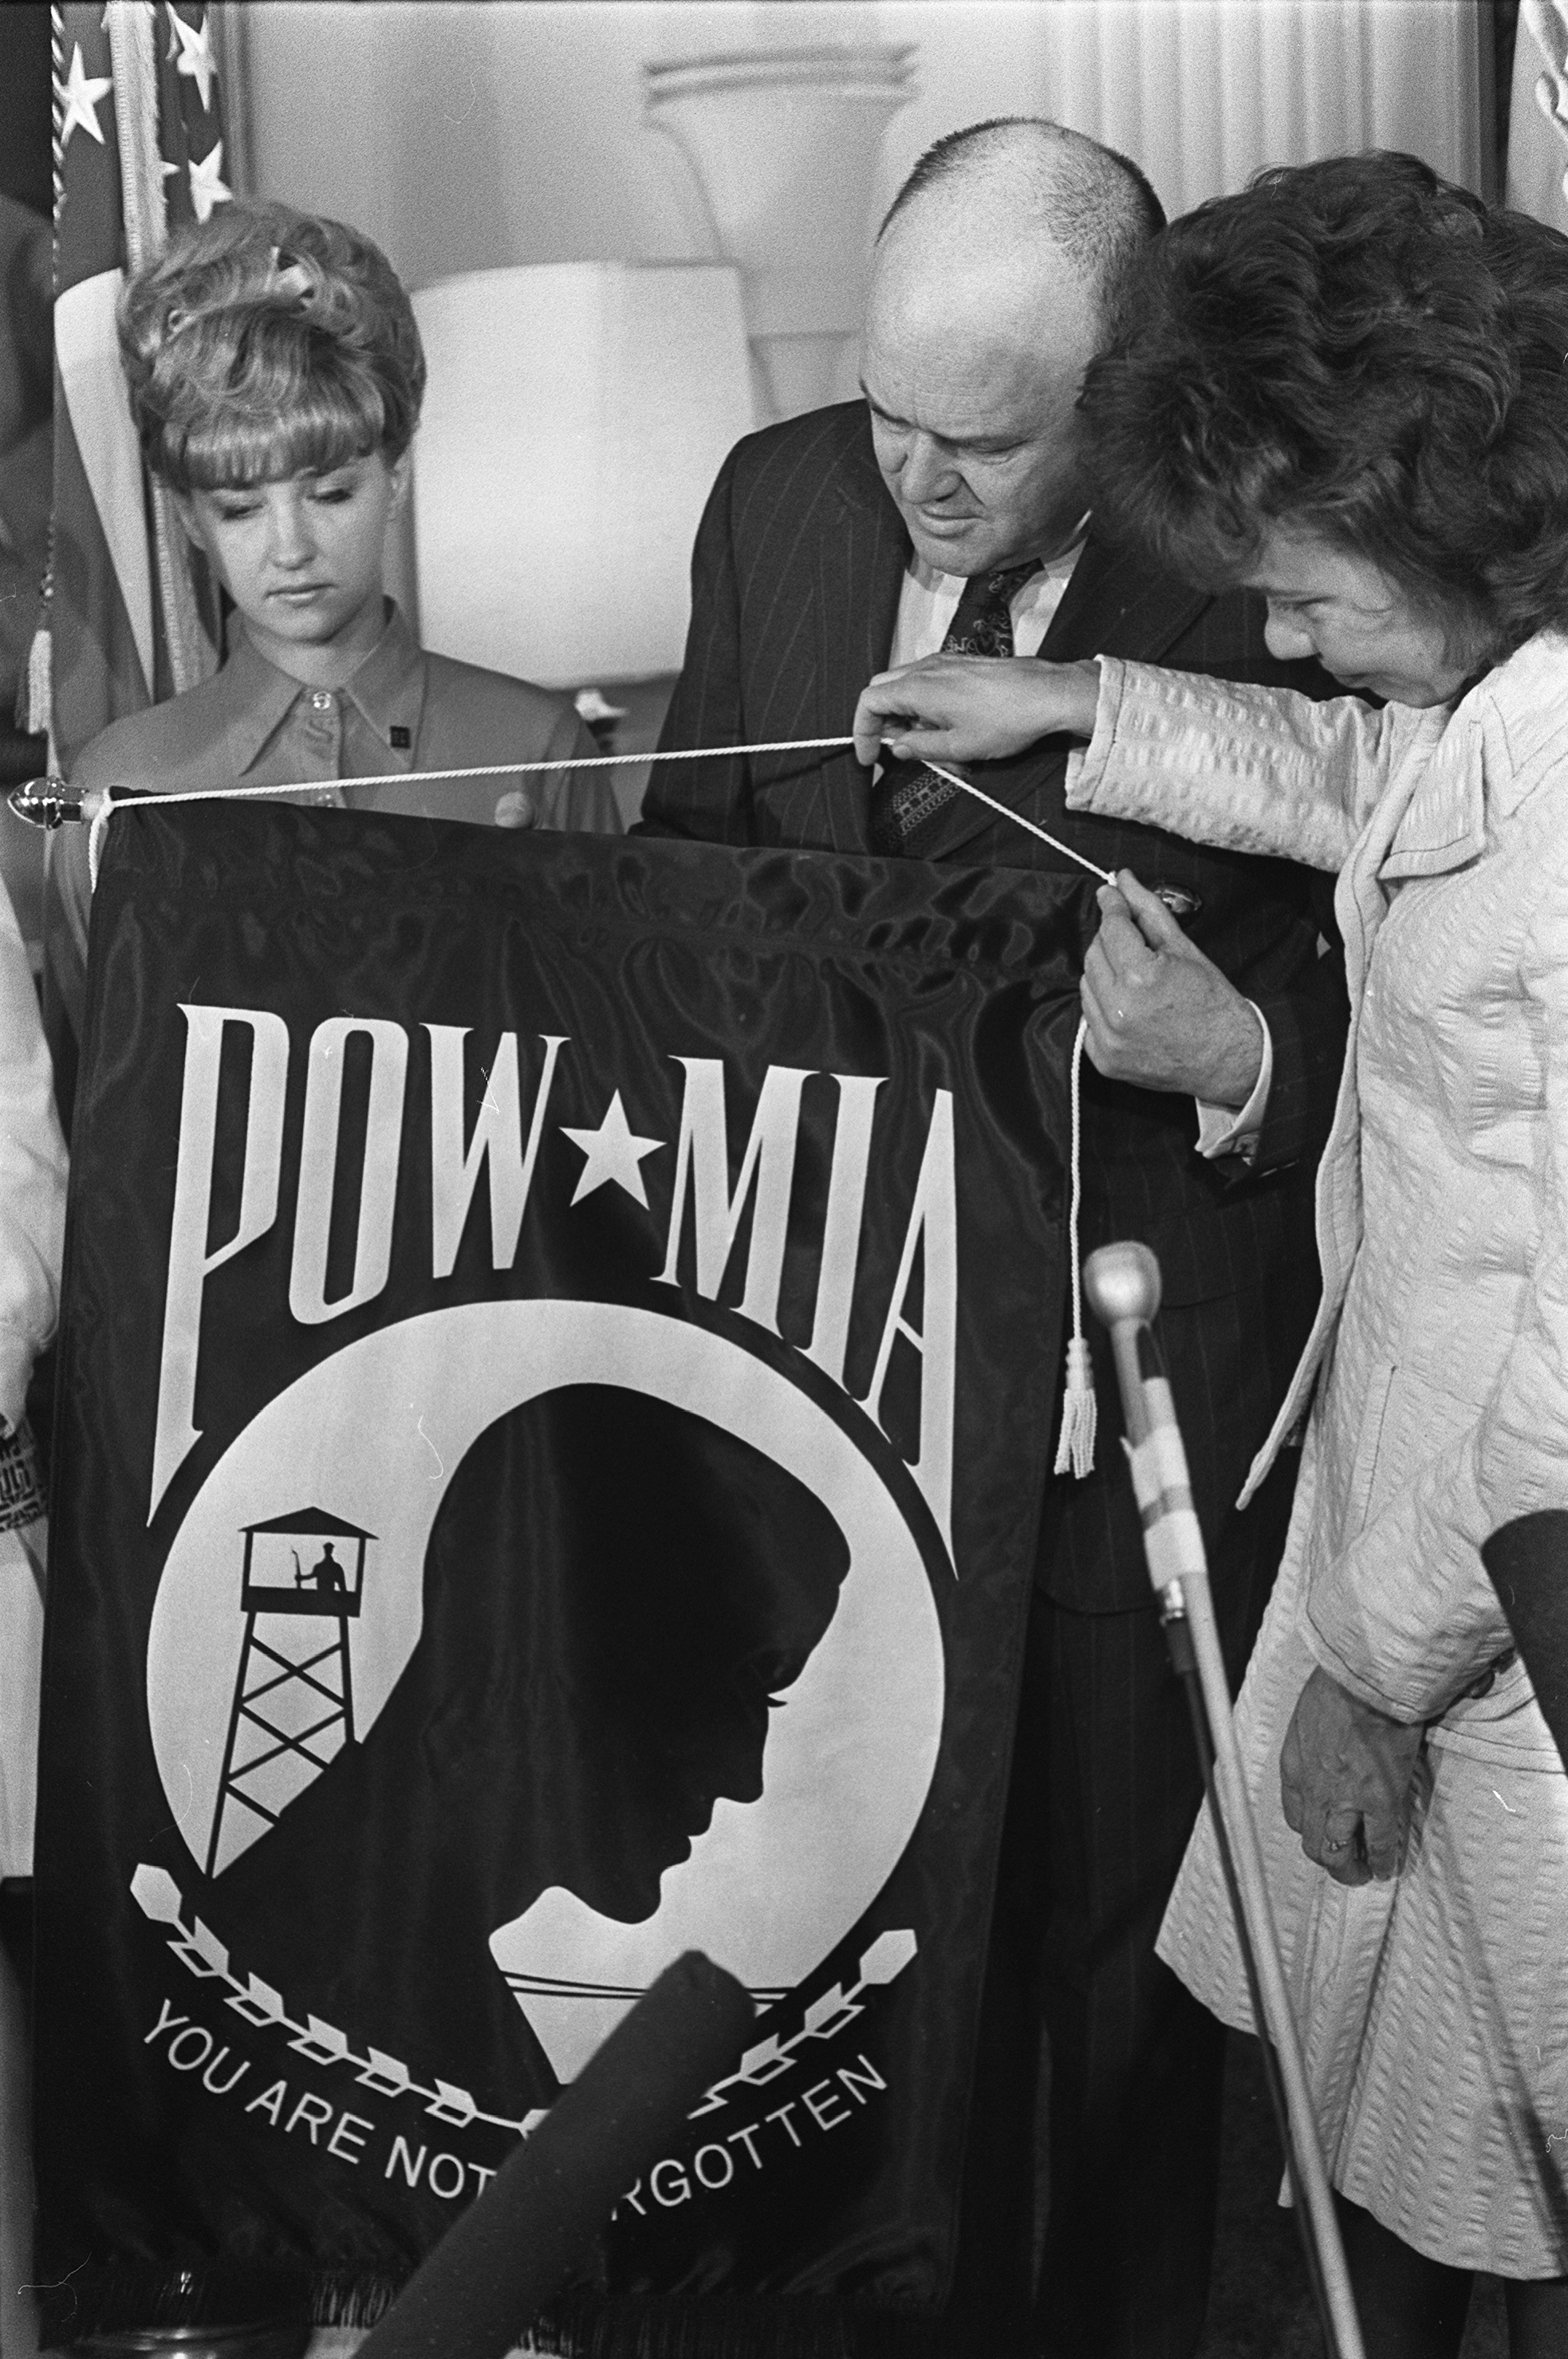 Air Force POW wife and National League member Evelyn Fowler Grubb (right) presents the flag of the National League of Family Members of Prisoners of War and Missing in Action in Southeast Asia to Secretary of Defense Melvin Laird in 1972. POW mother Jean Ray looks on. Image courtesy of the Associated Press.